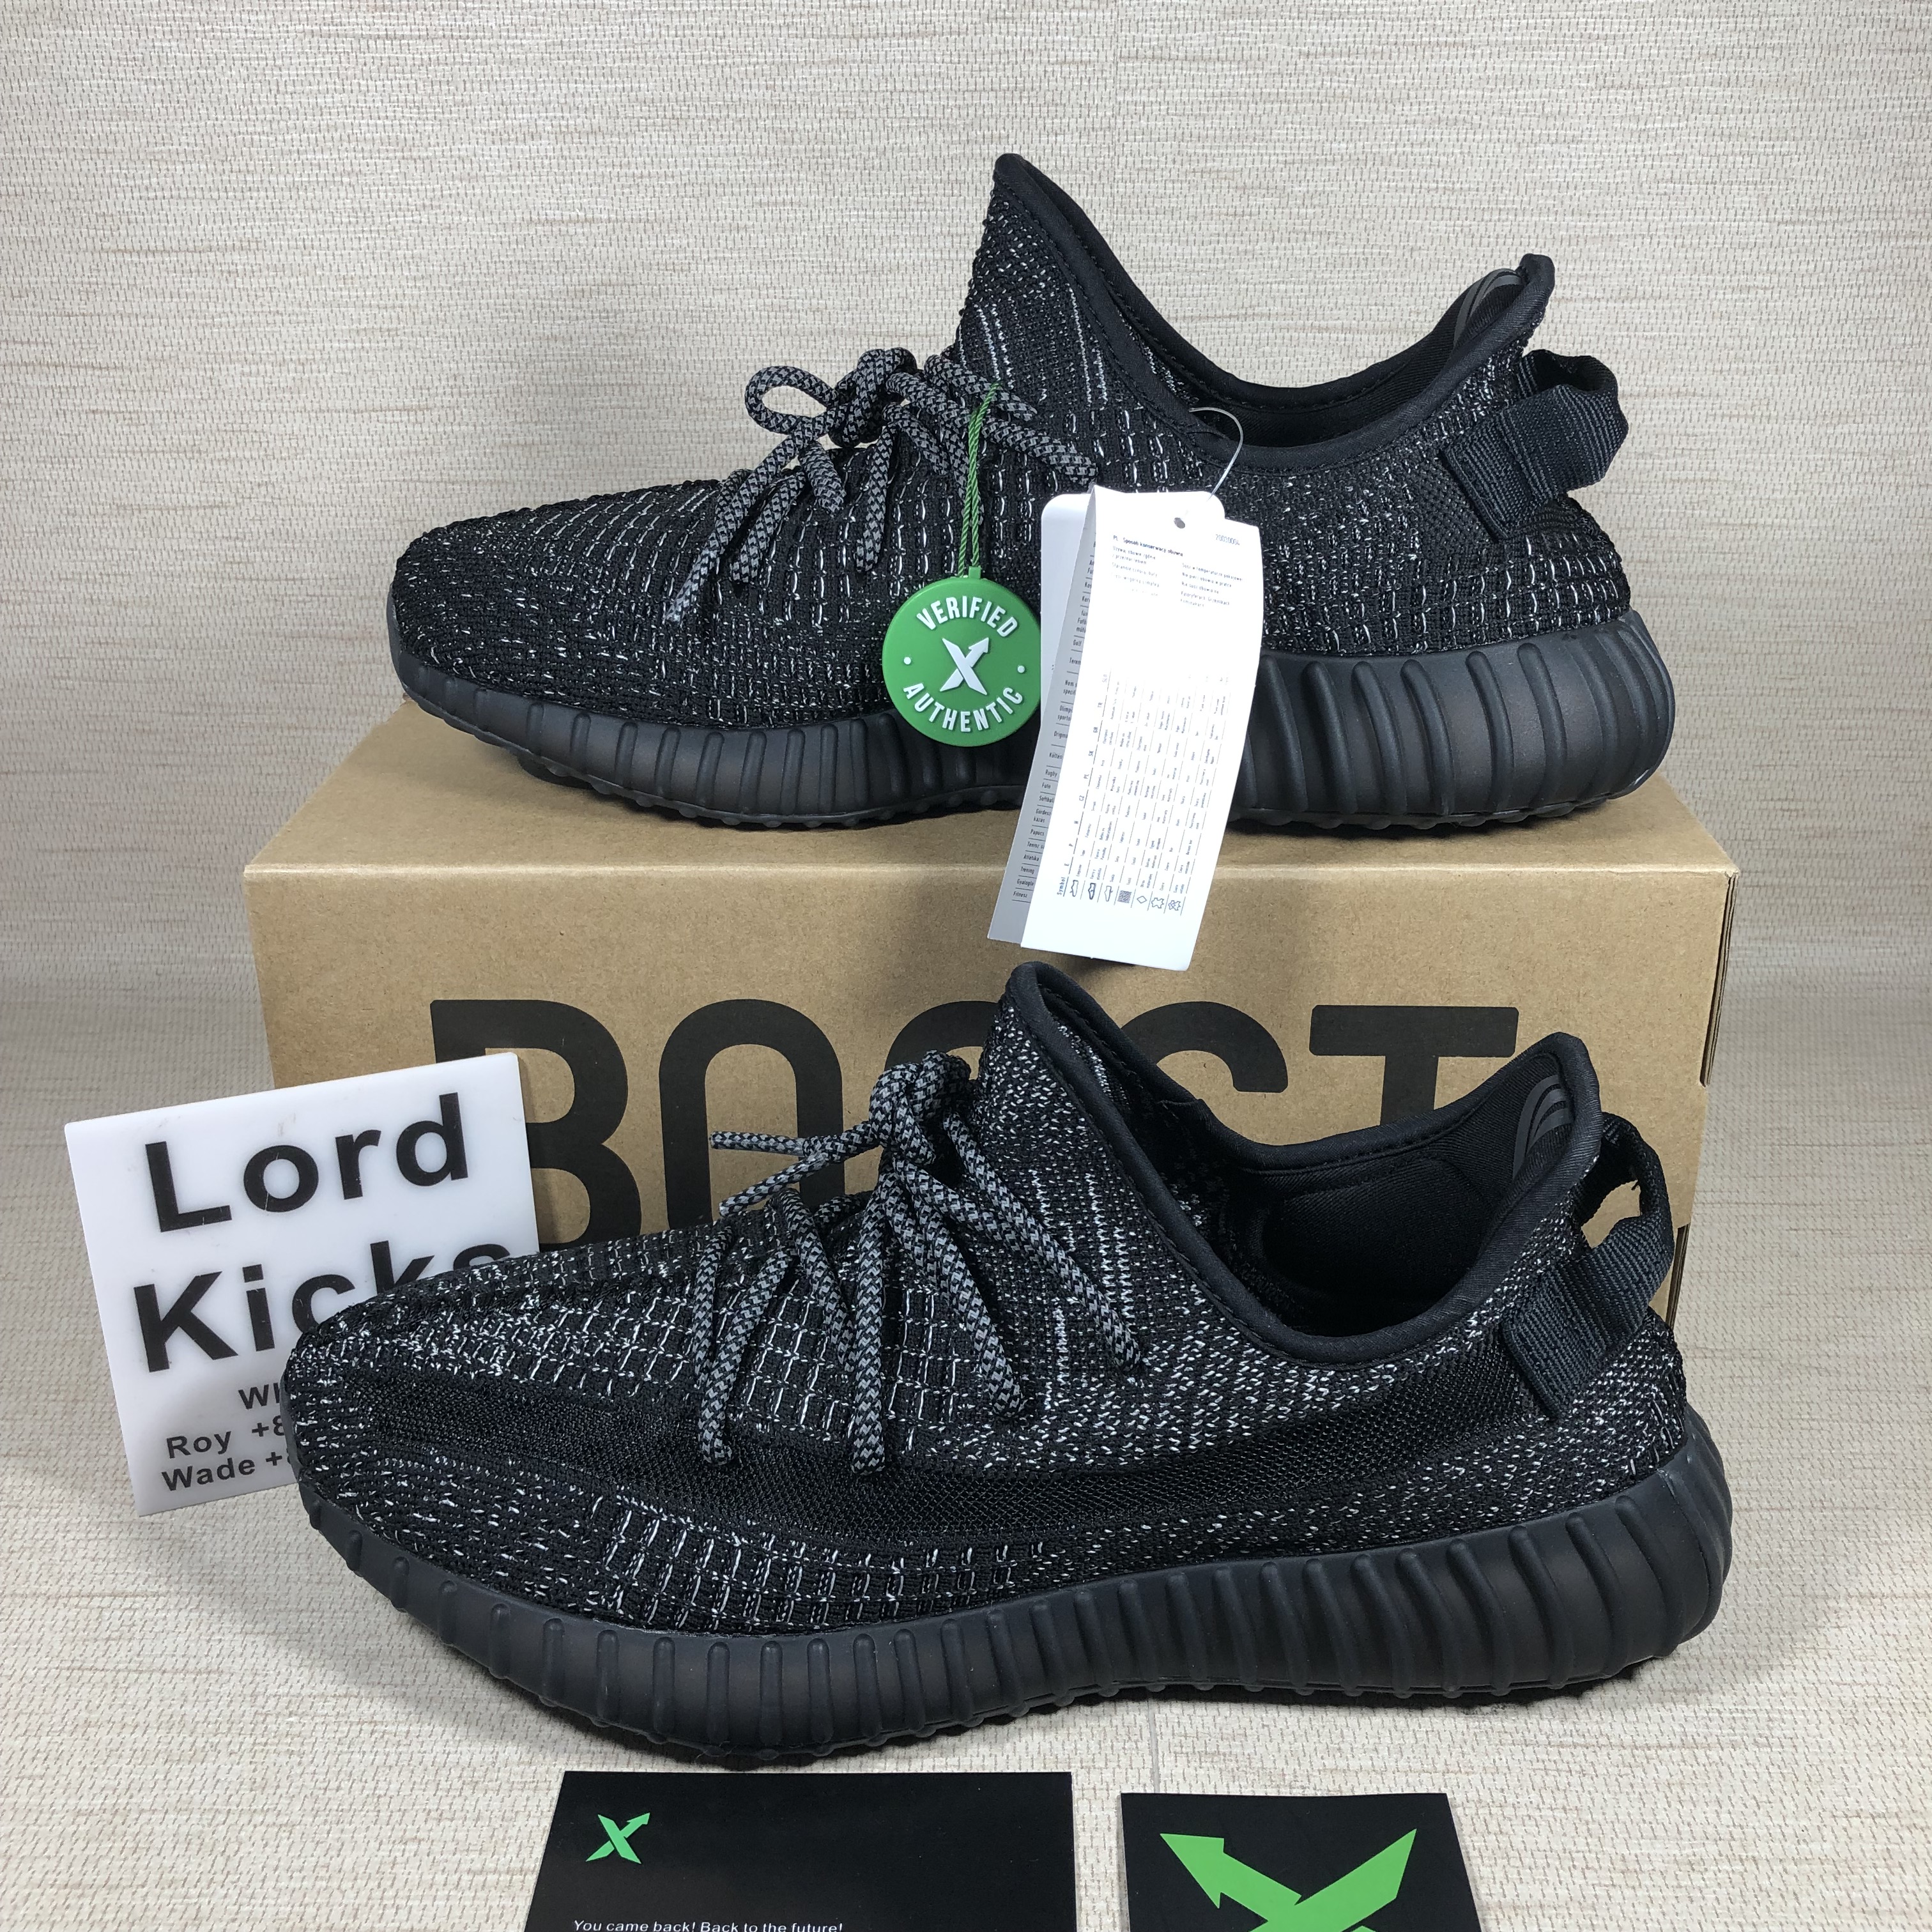 yeezy boost 350 cheap authentic